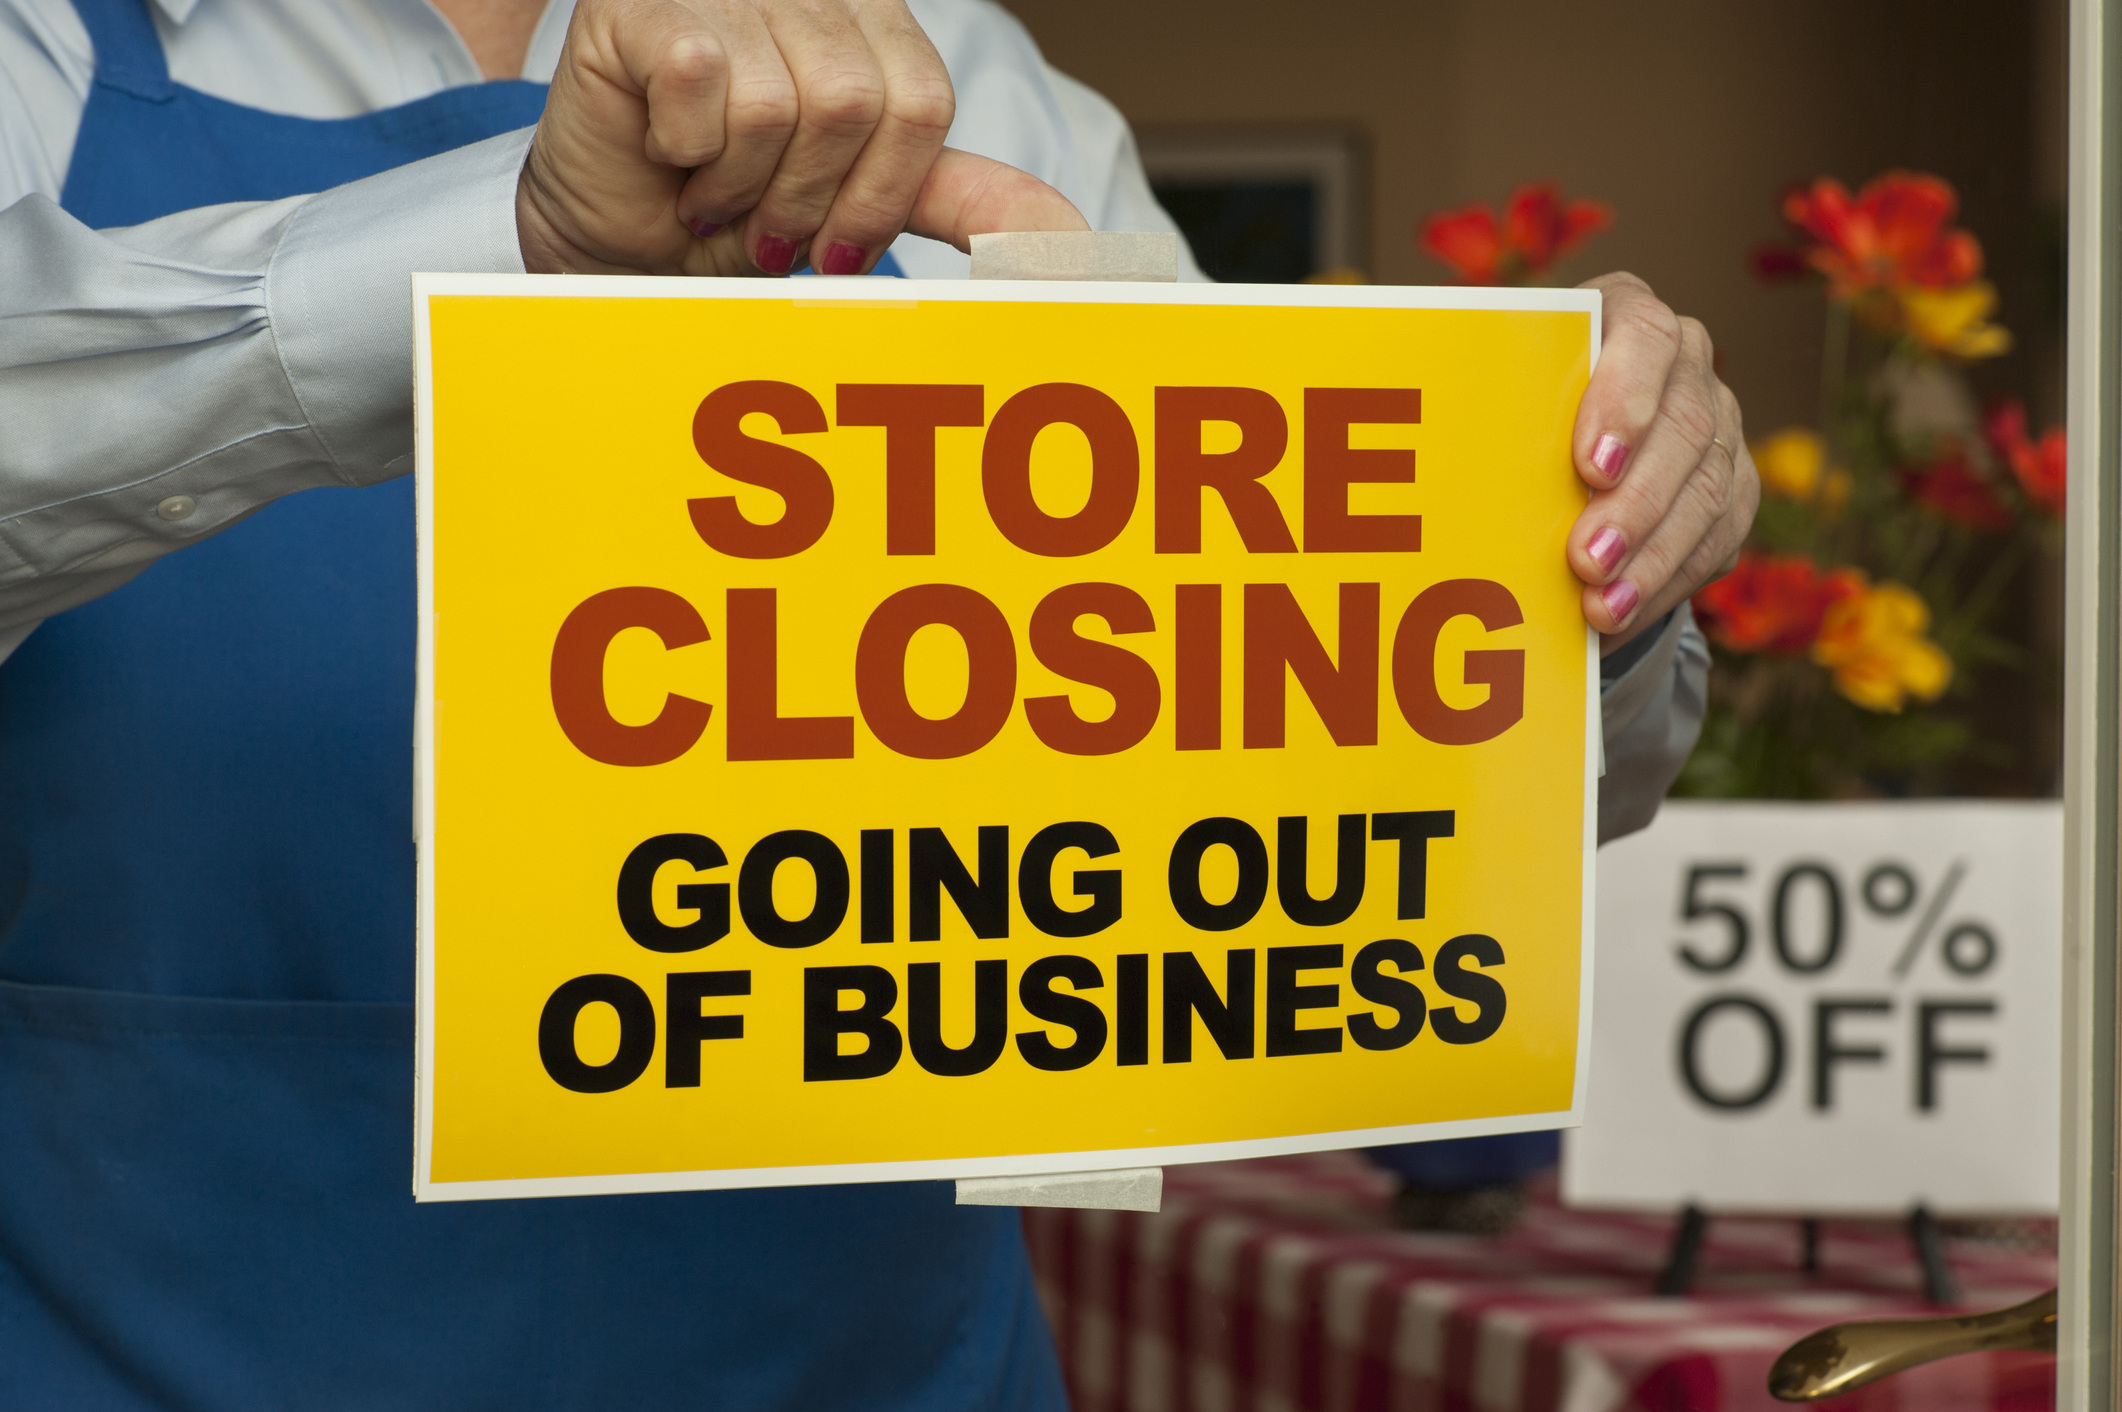 Survey Shows Retailers to Shut Down Almost 3,200 Stores, an Increase from Previous Year